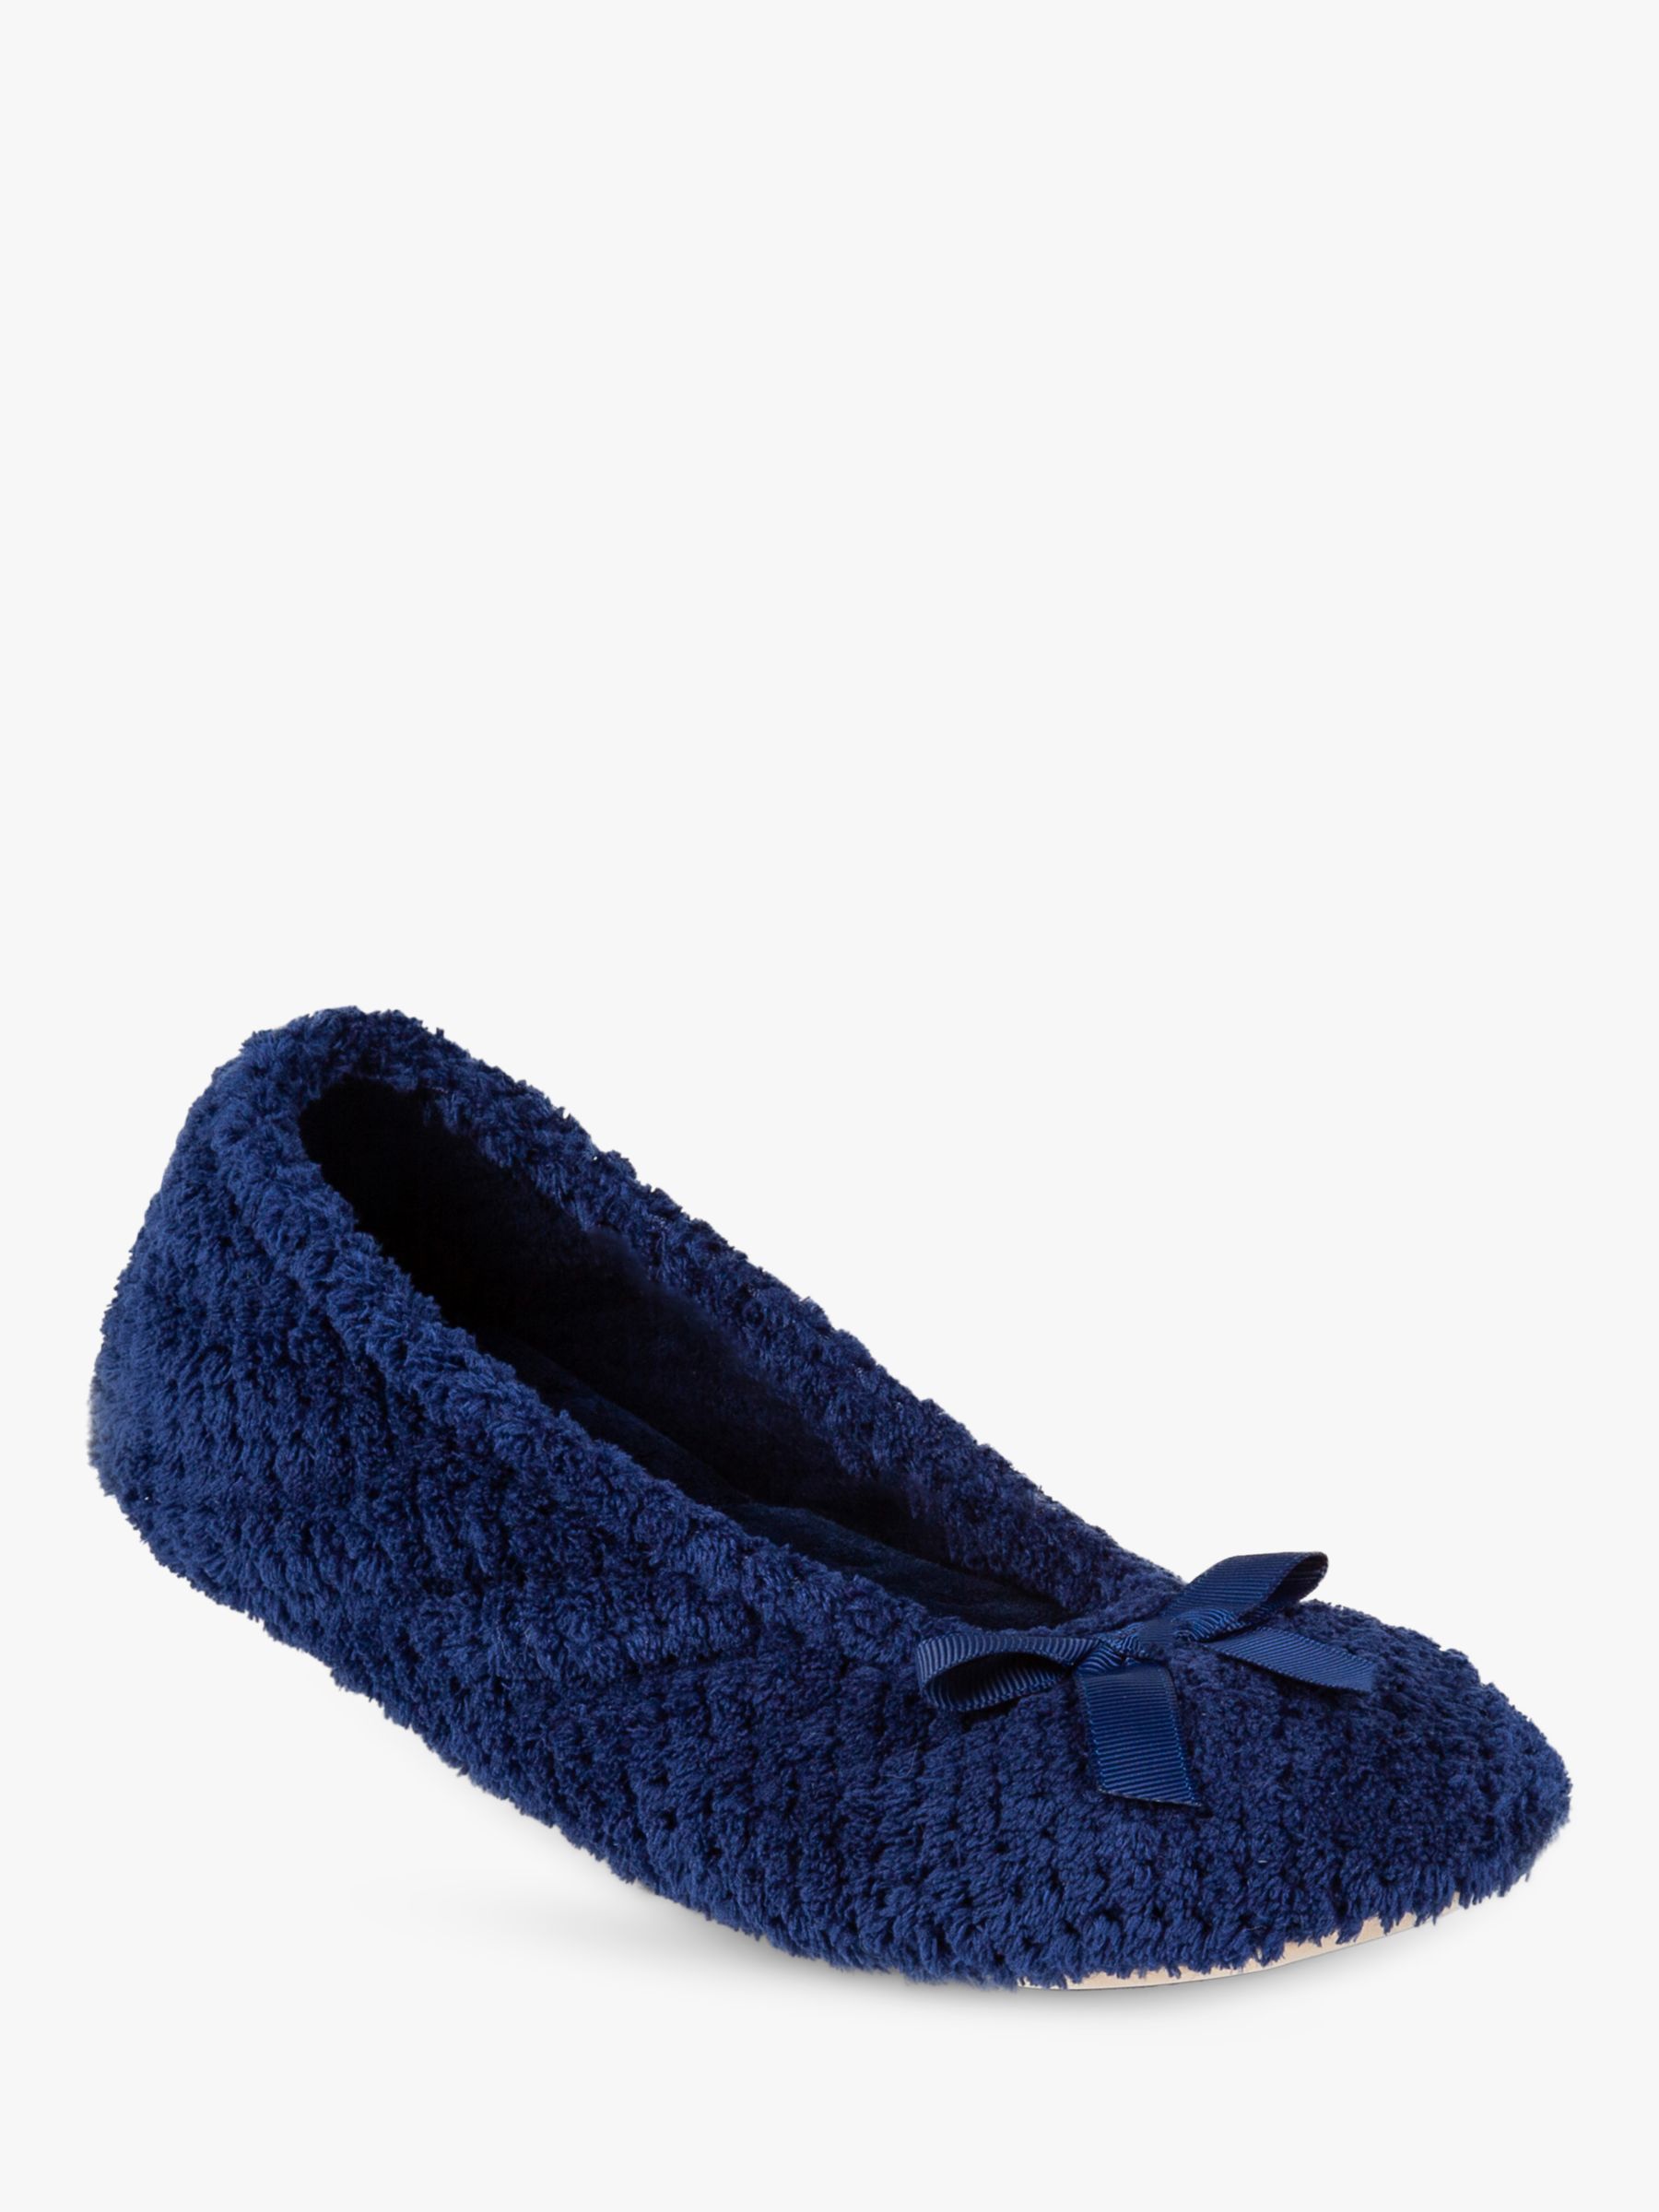 totes Terry Popcorn Ballet Slippers, Navy at John Lewis & Partners